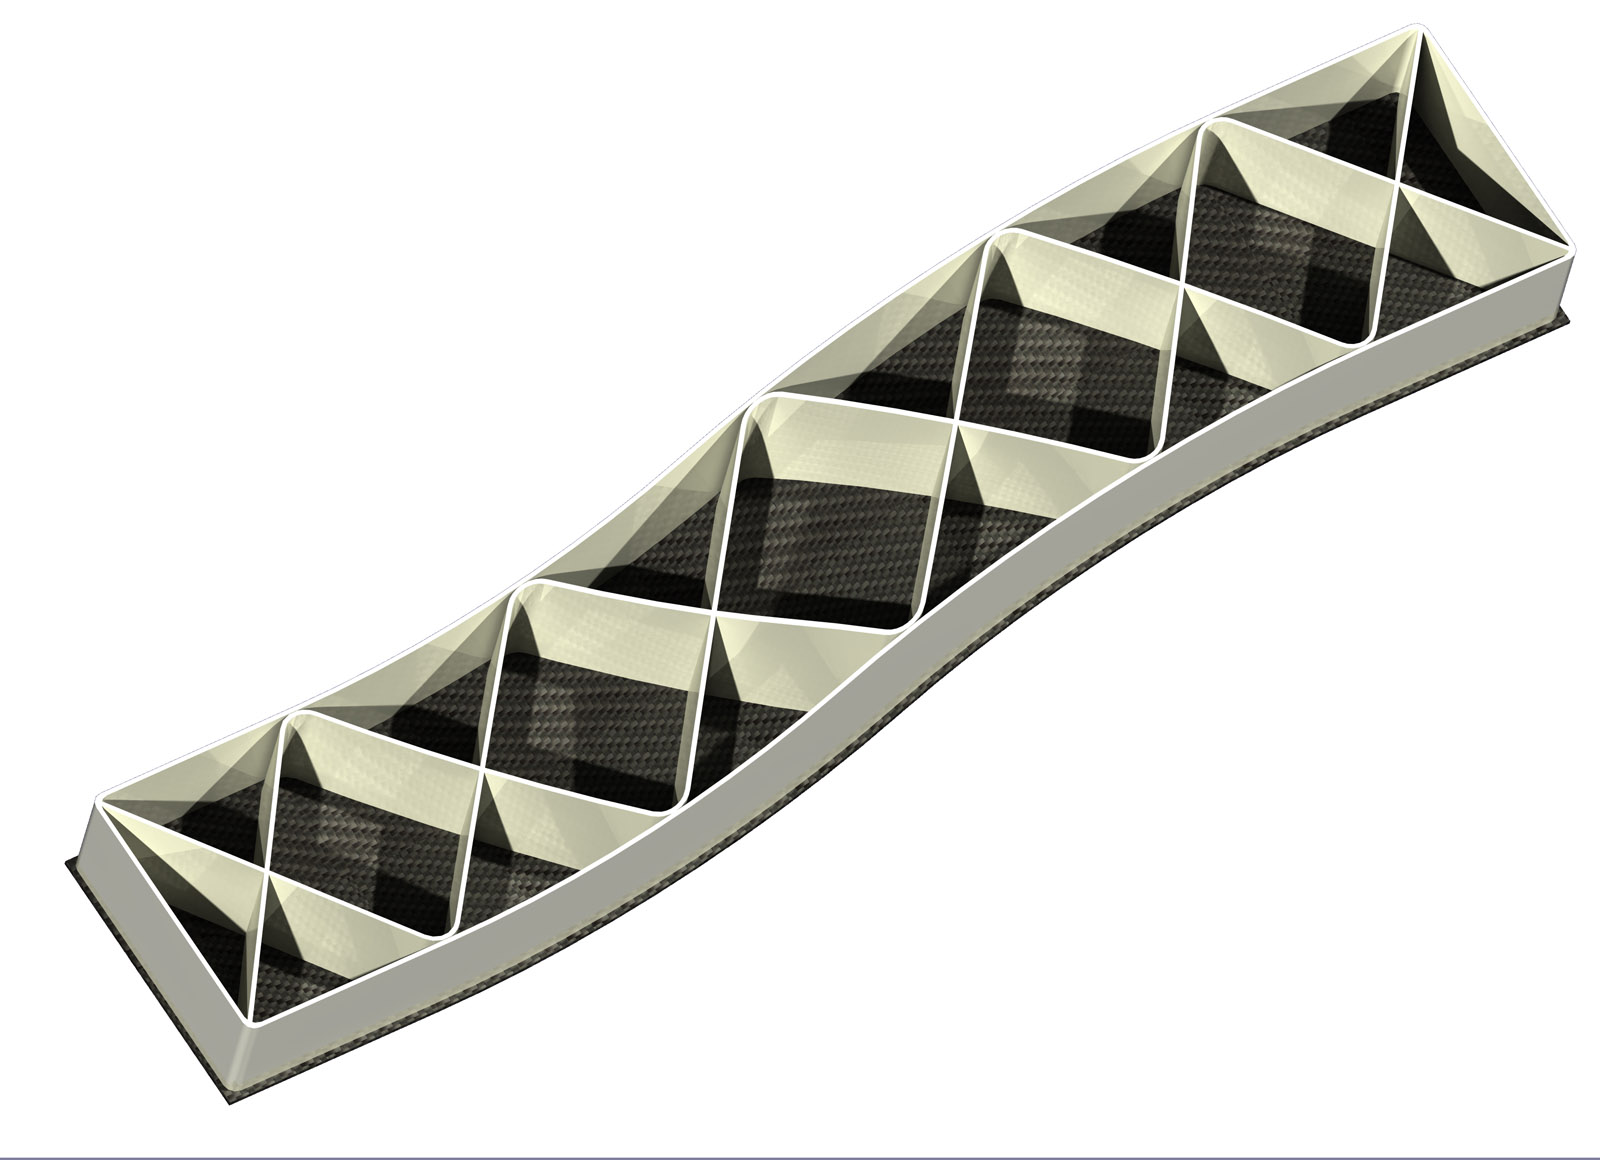 This experimental component is a hybrid of carbon fiber reinforced plastic sheet metal and 3D printed structures – SEAM makes it possible to print on injection-molded components or sheet metal for the first time. Image via Fraunhofer IWU.